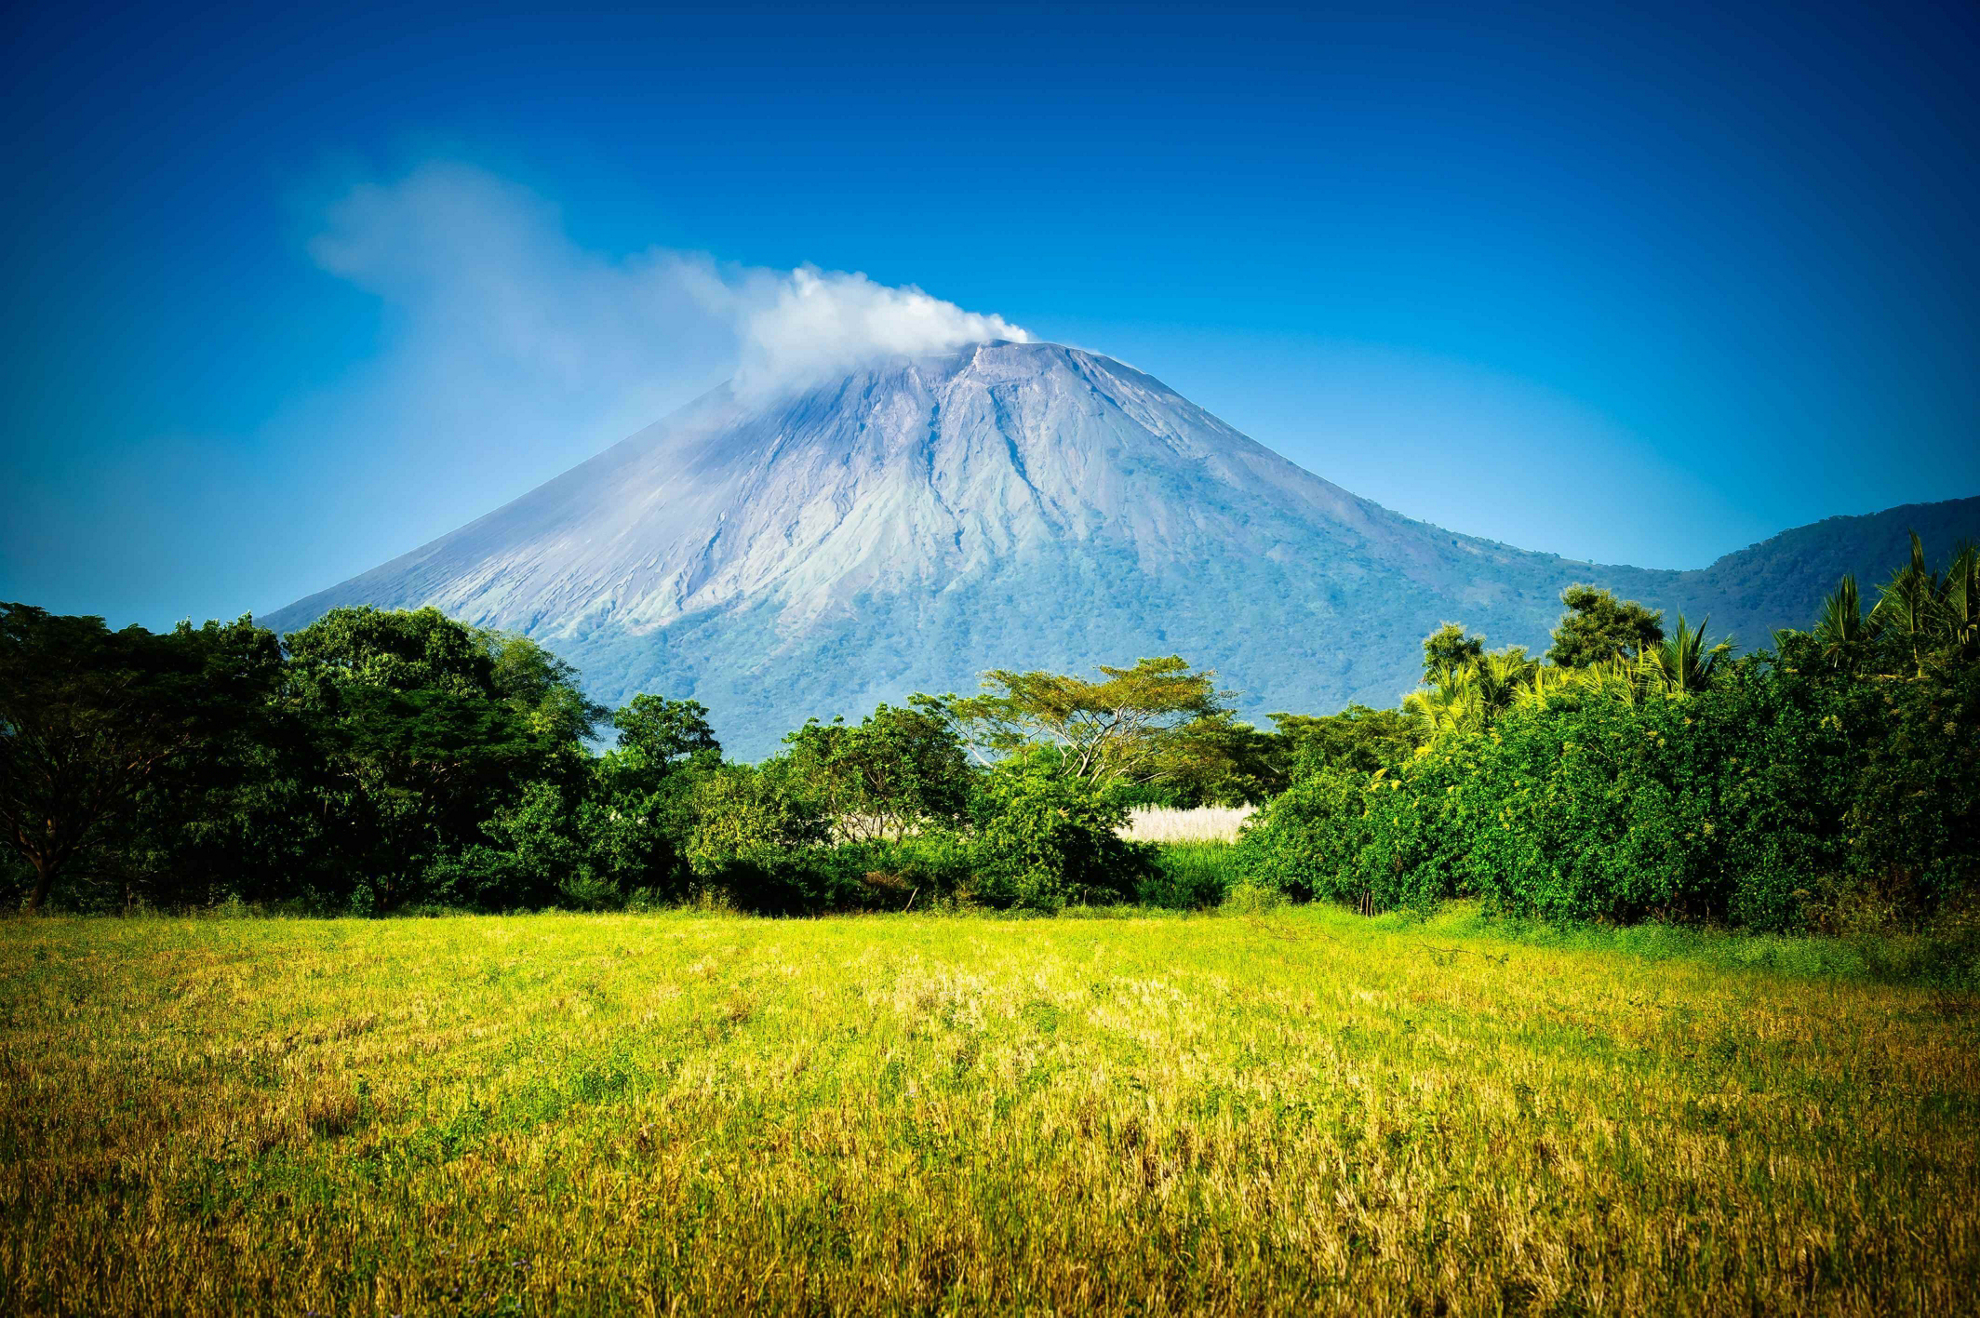 Nicaragua’s attractions include is many lakes and volcanoes